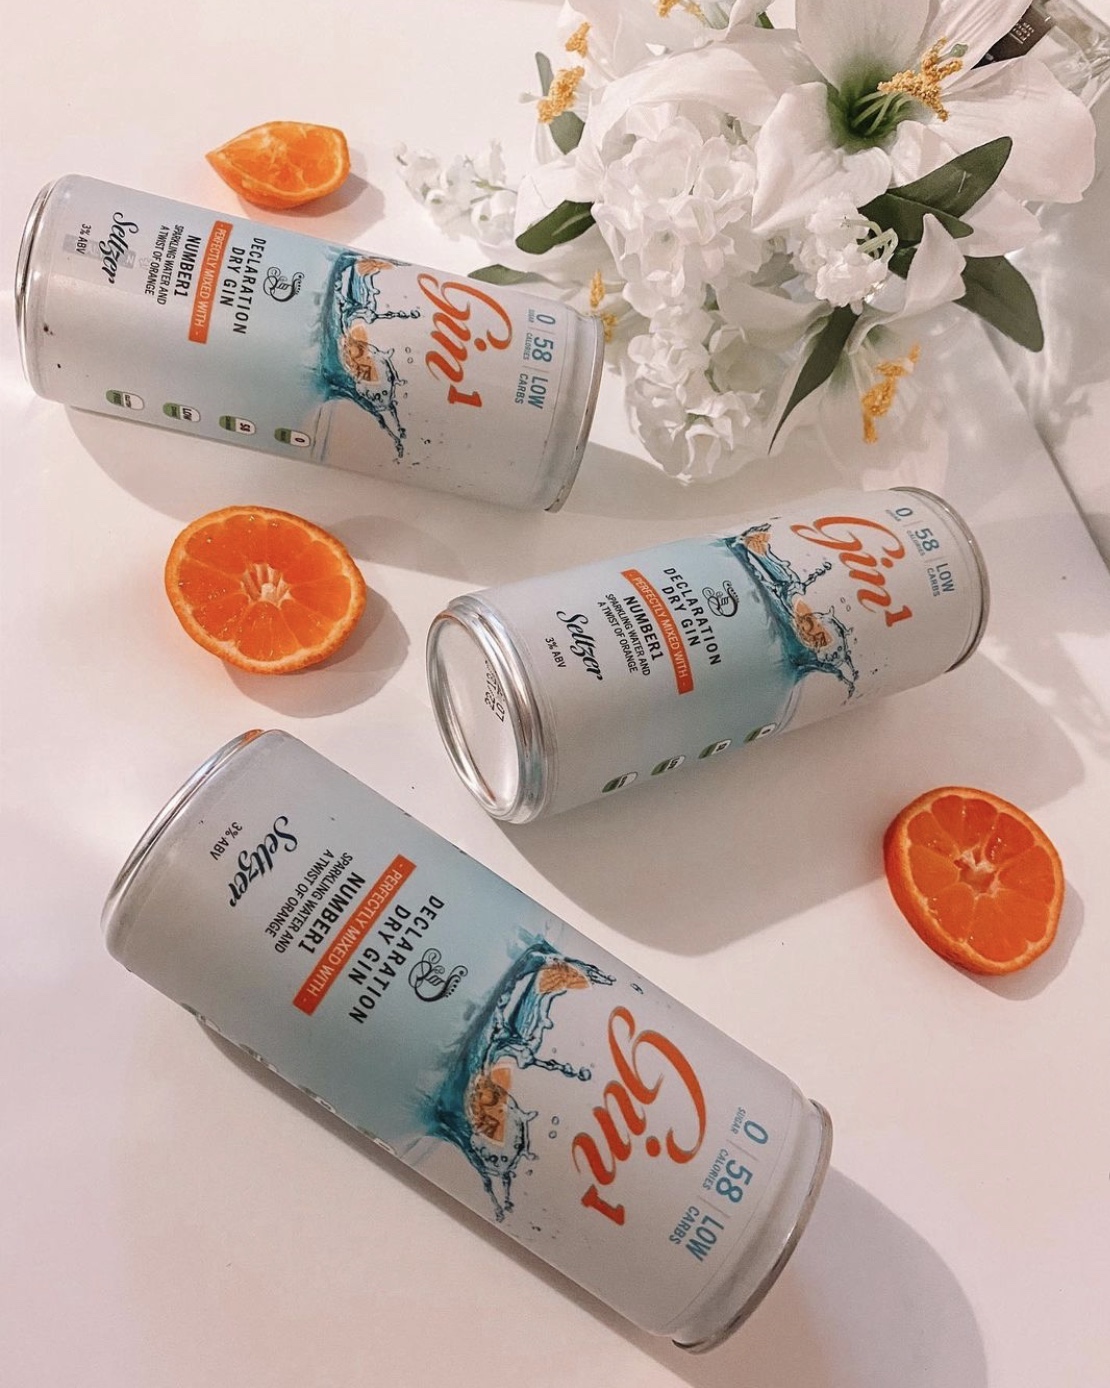 Gin1 Seltzers, Gin & Sparkling Water, Sugar-free, Summer Drink, Low Calorie Drink, Mother's Day Giveaway, Win, Competition, Number1 Drinks, Naturally Flavoured, The Frenchie Mummy